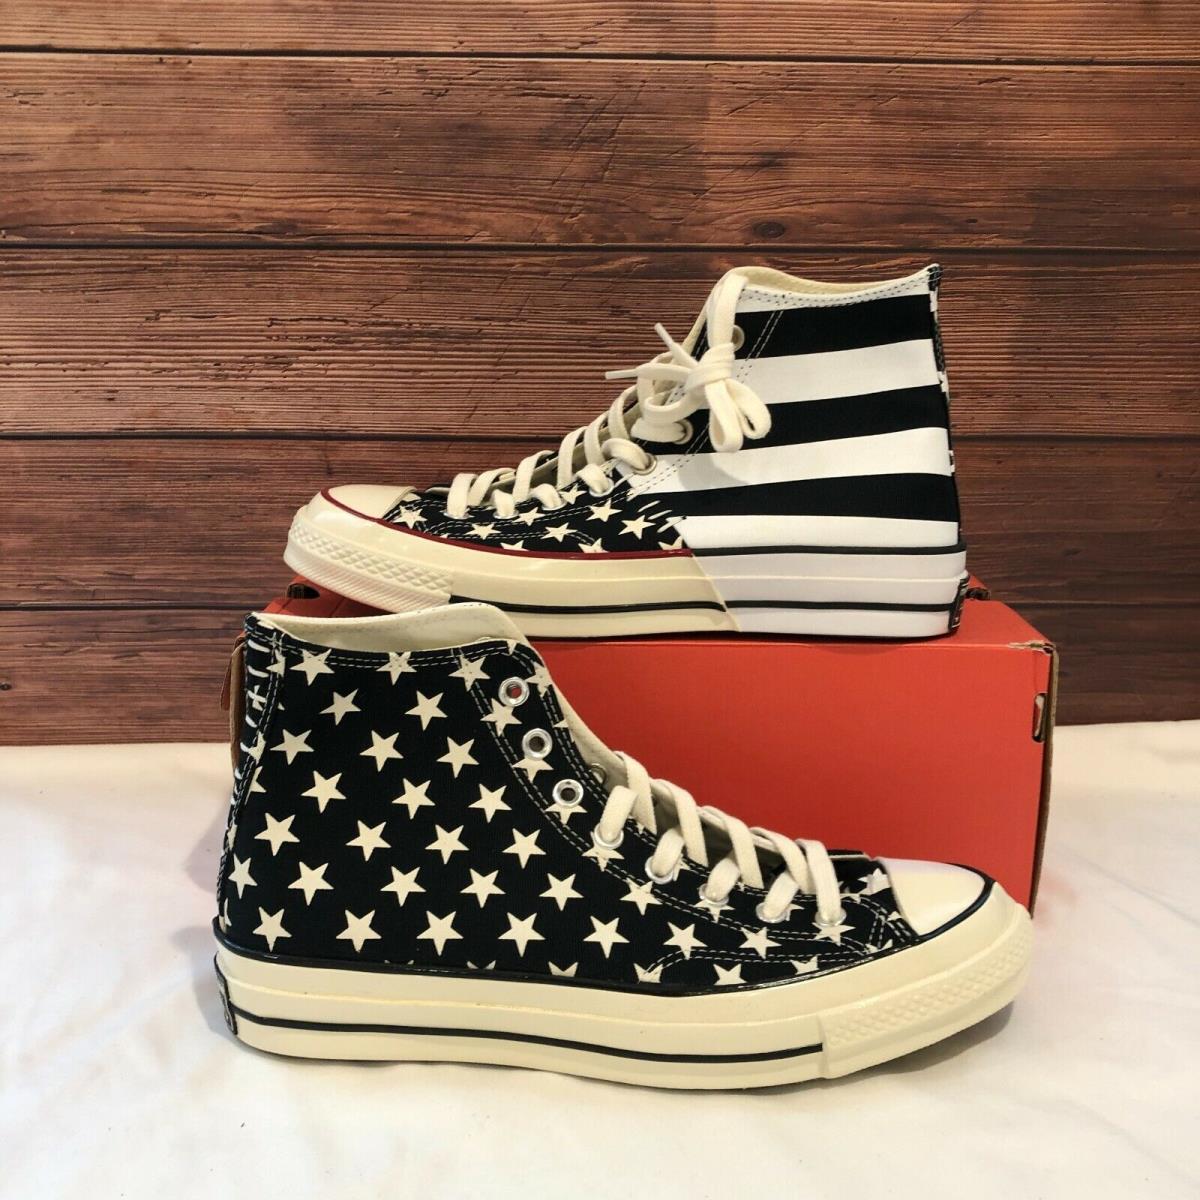 Converse Chuck Taylor All-star 70 Hi Restructured American Flag Shoes 166425c